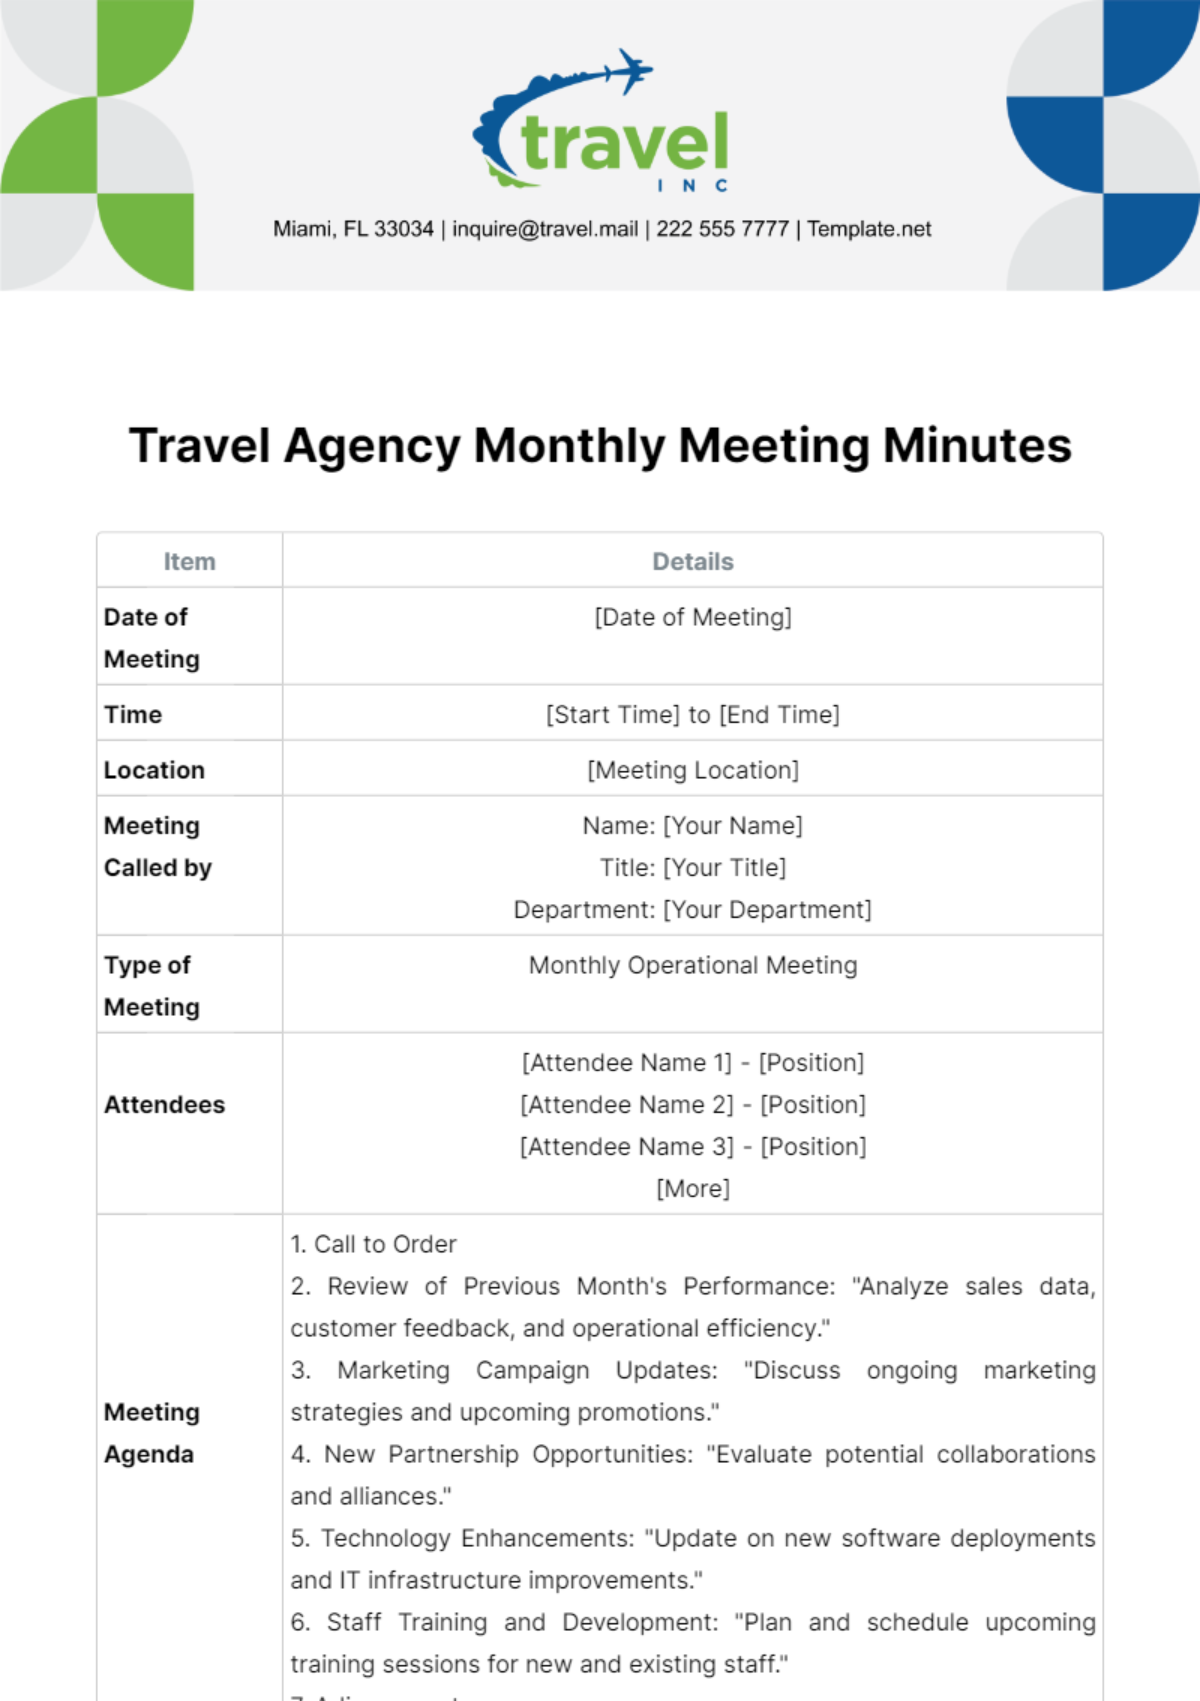 Travel Agency Monthly Meeting Minutes Template